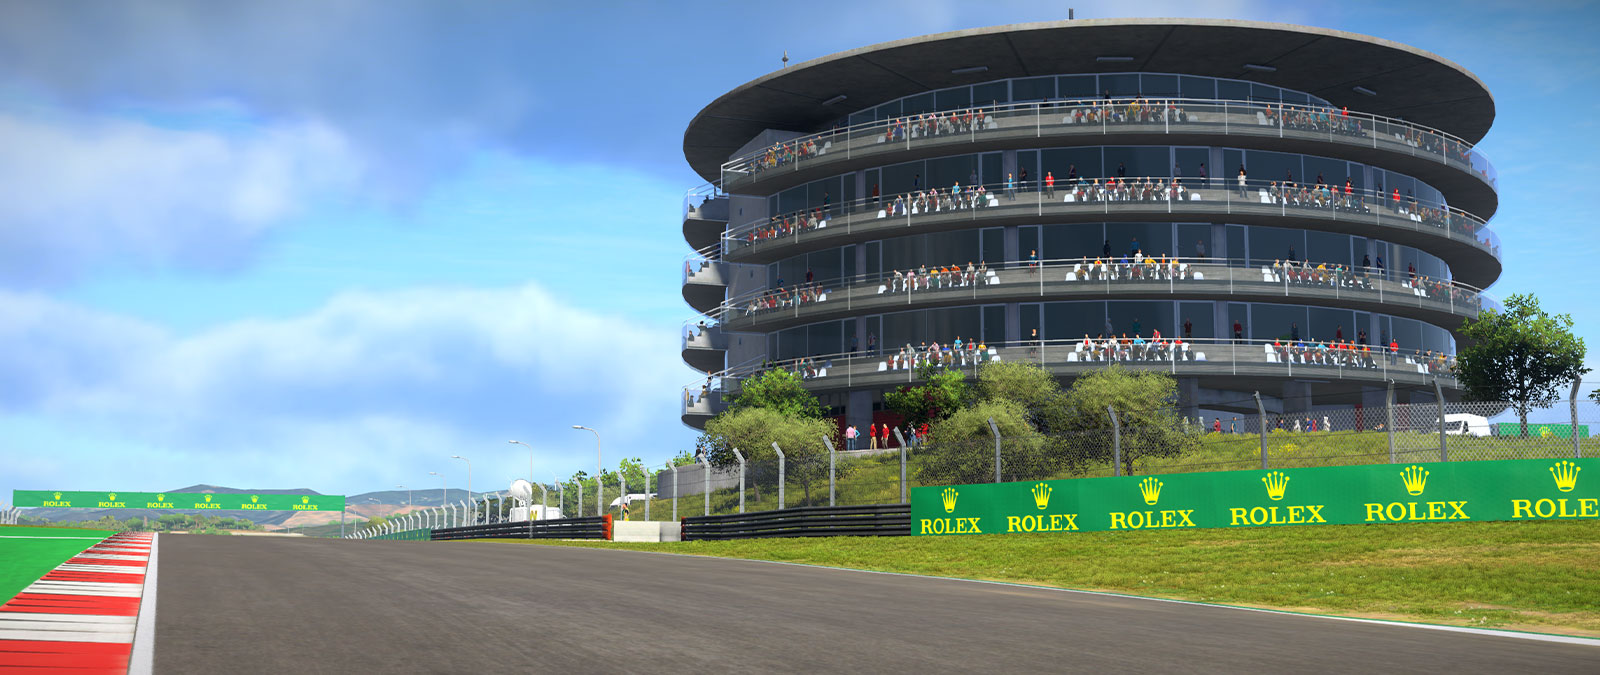 Portimao racetrack with a building with many people on the balconies above a Rolex sponsored wall